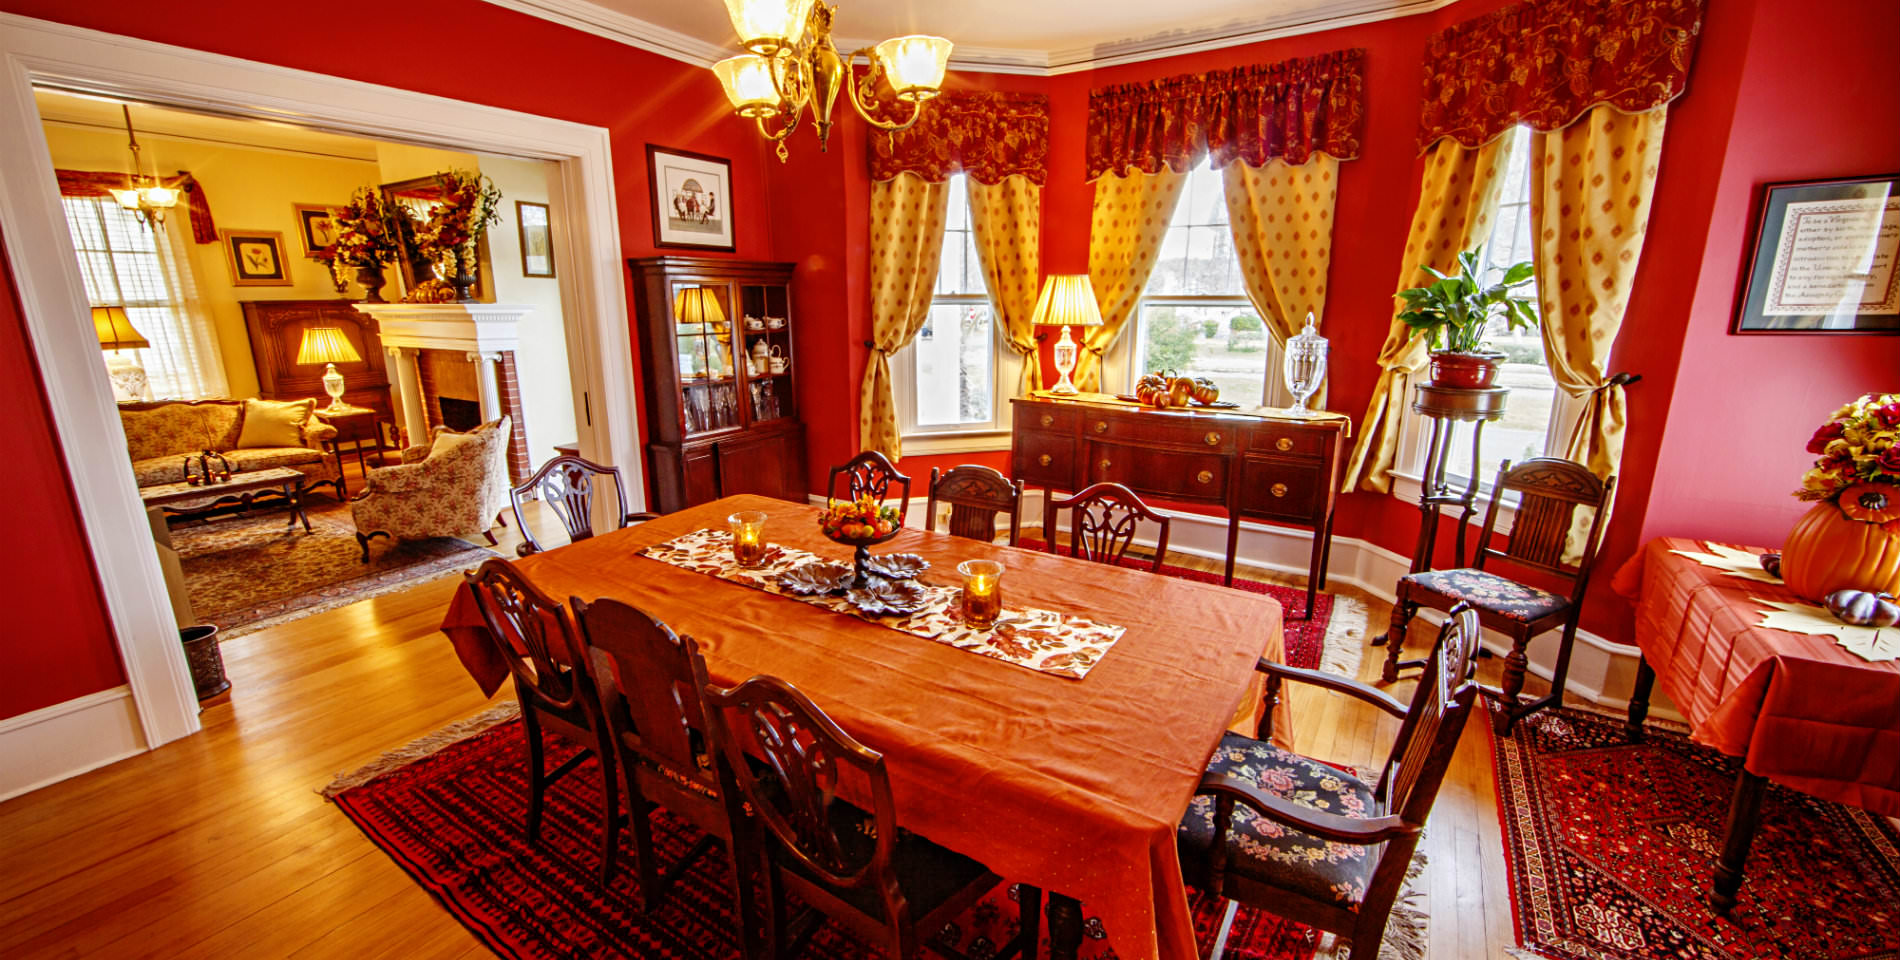 The ornately decorated dining room of the Inn, with cranberry red walls and golden brown hardwood flooring. 